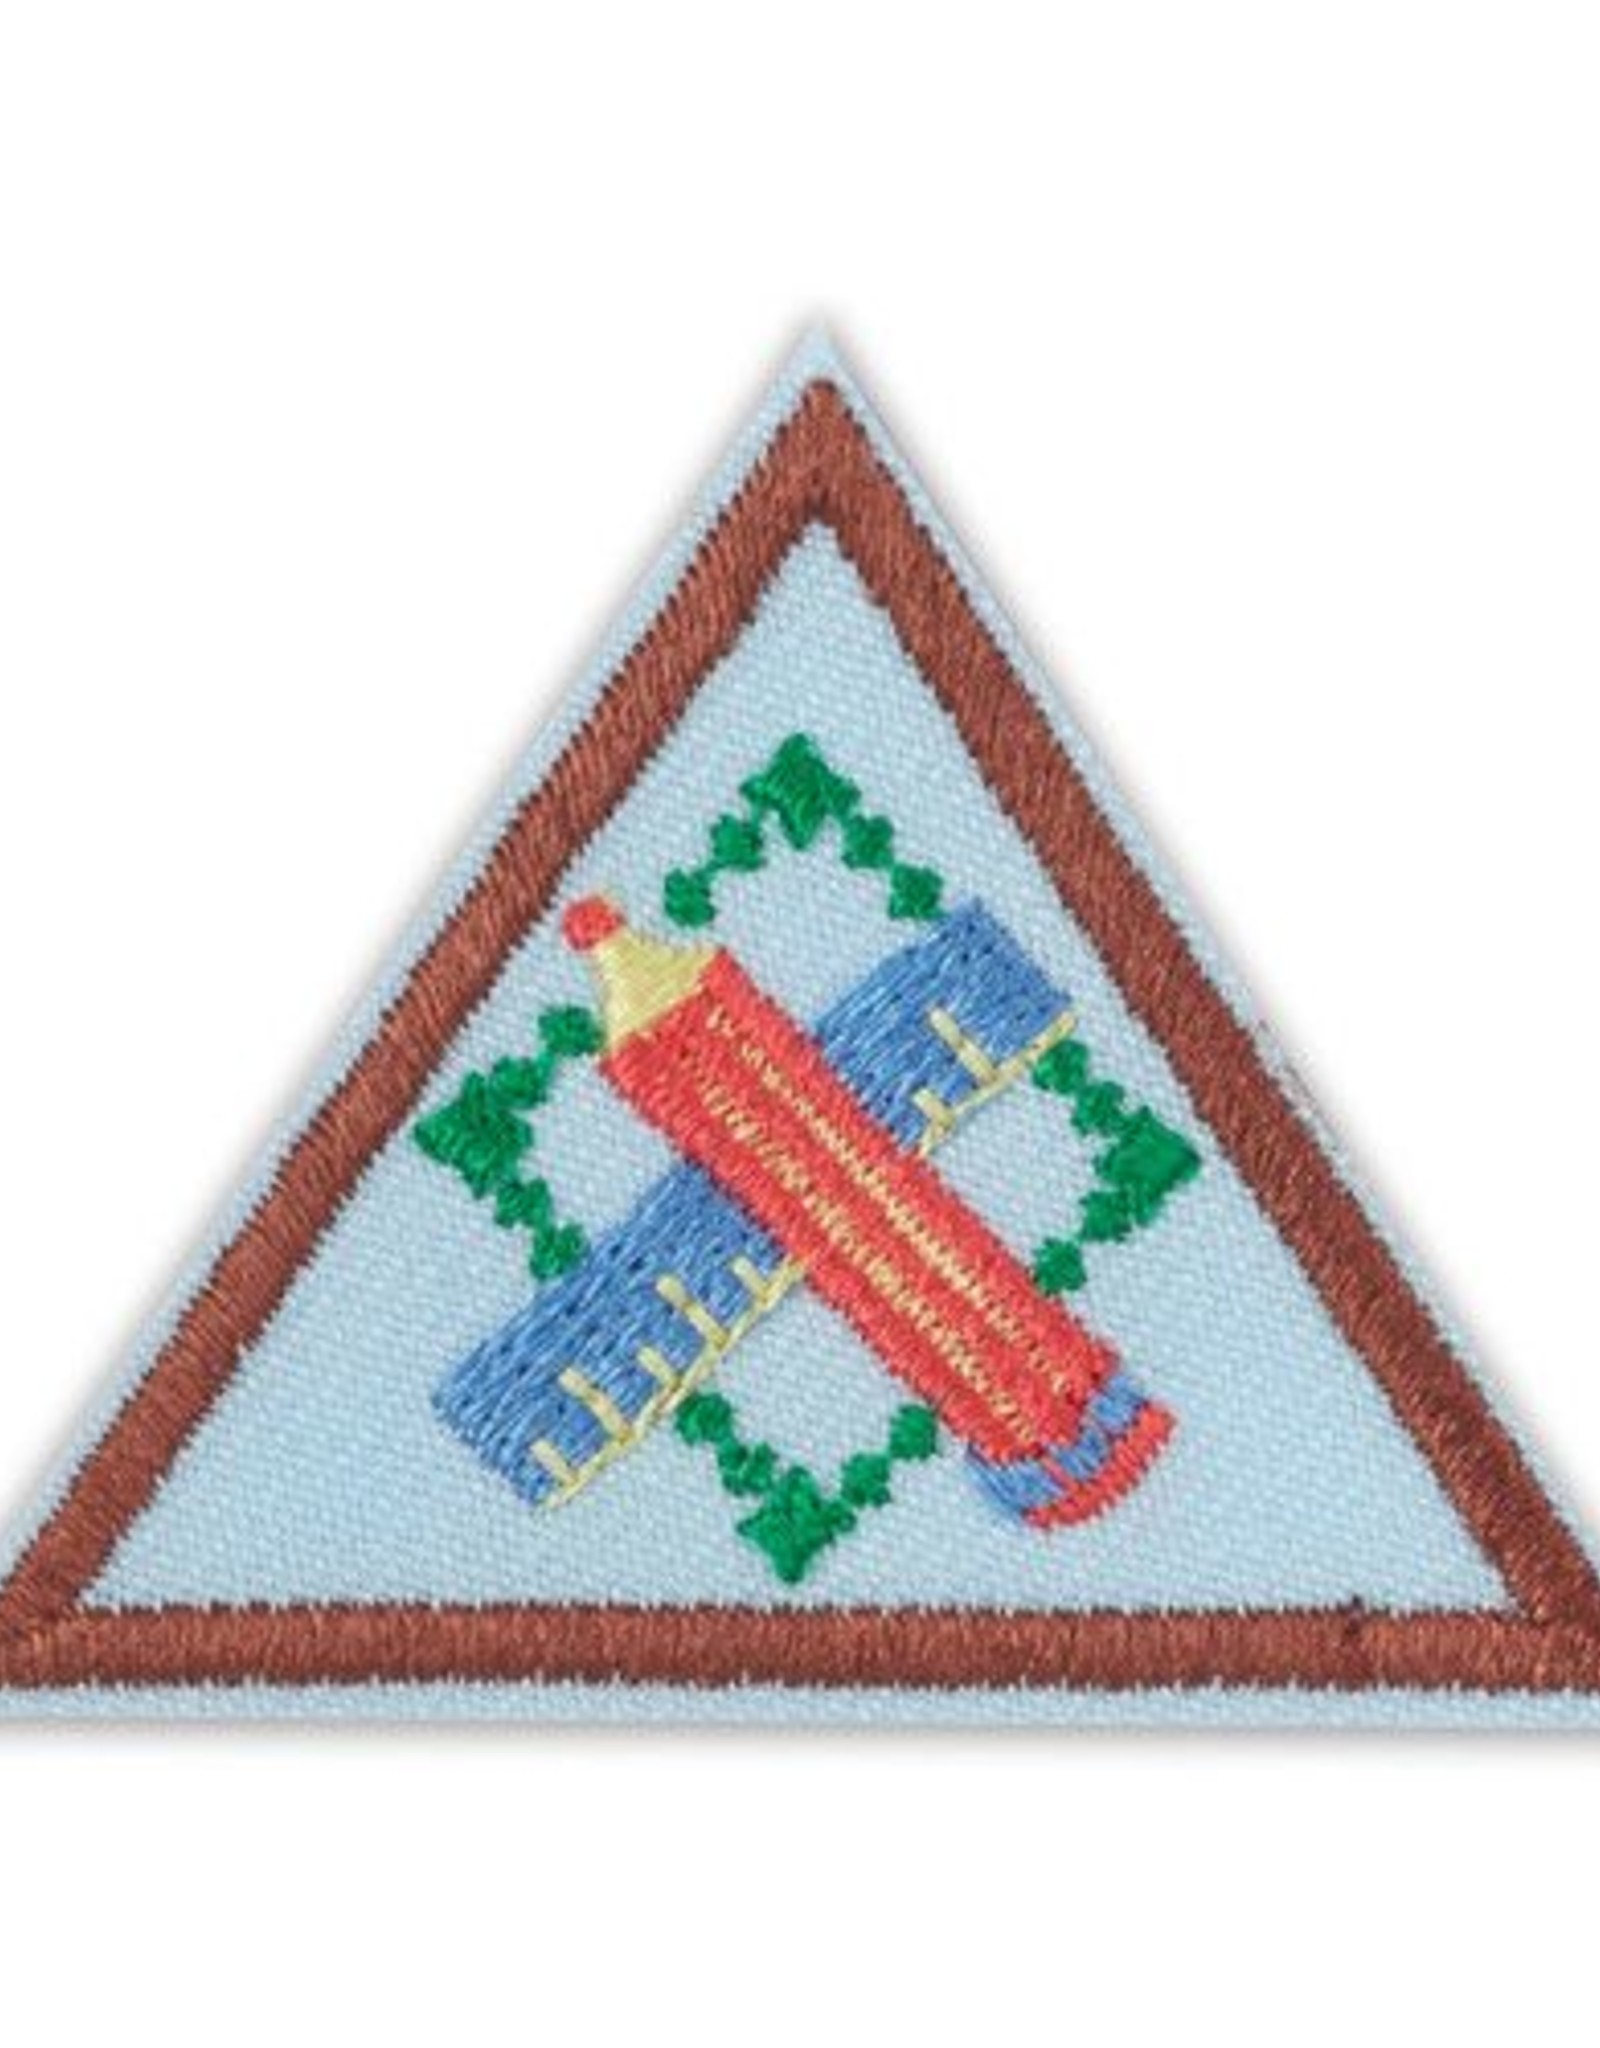 GIRL SCOUTS OF THE USA Brownie Engineering Journey Award Badge